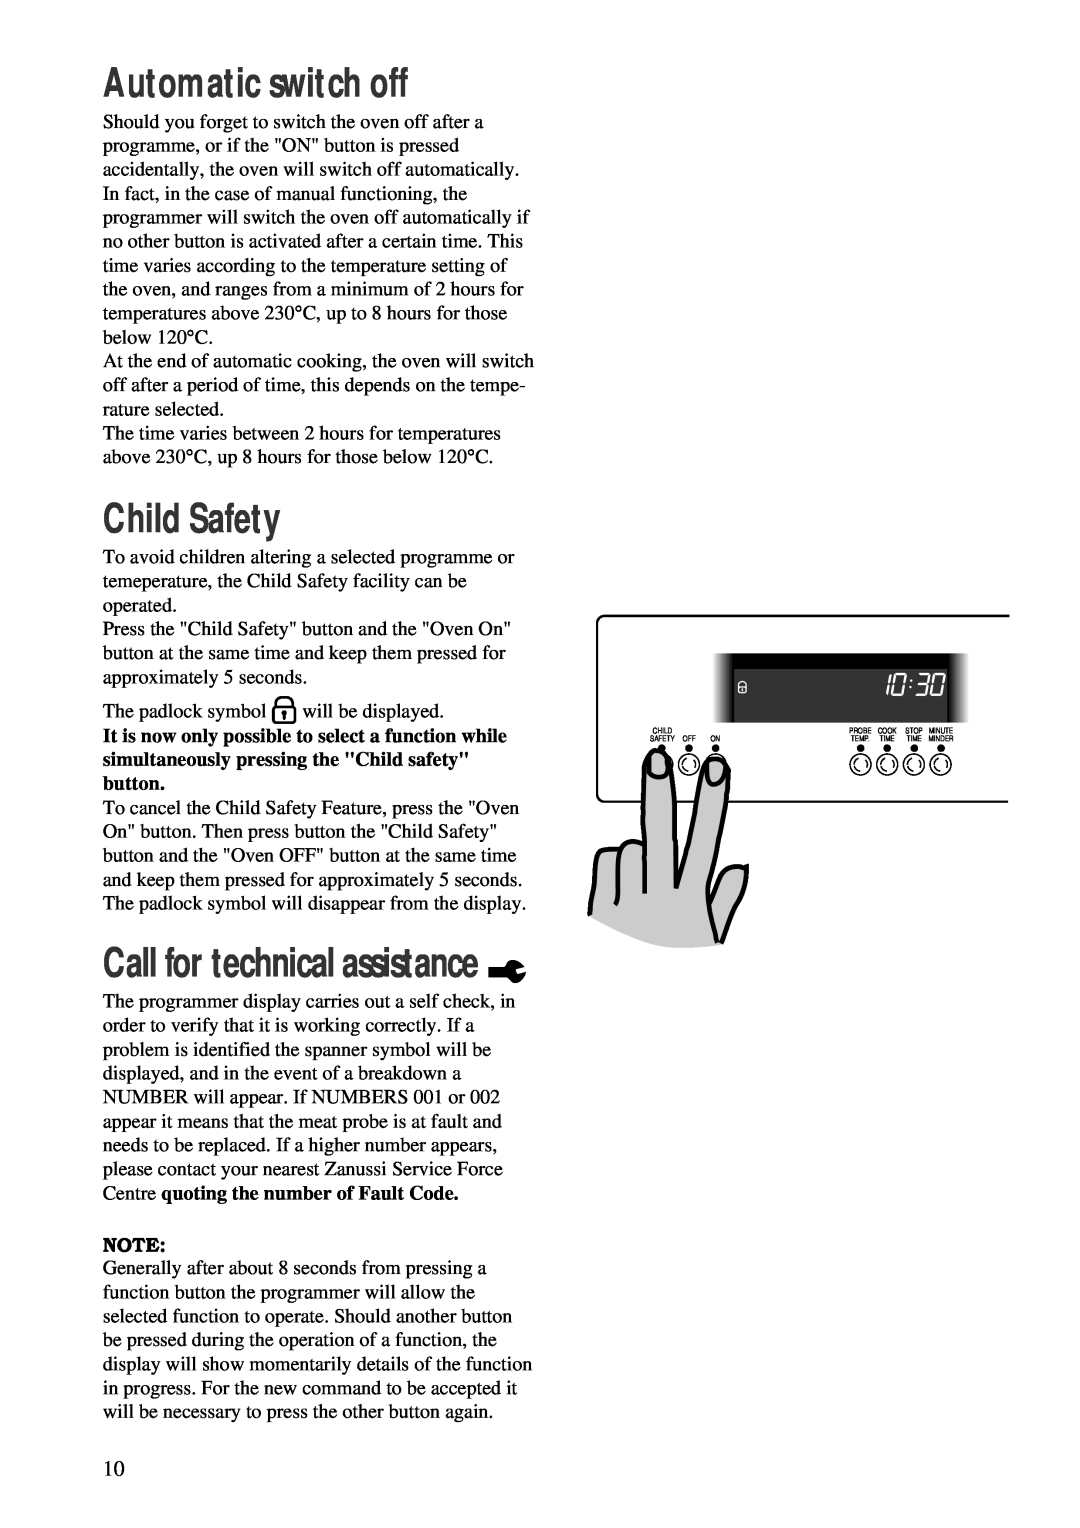 Zanussi ZBM 890 manual Automatic switch off, Child Safety, Call for technical assistance 